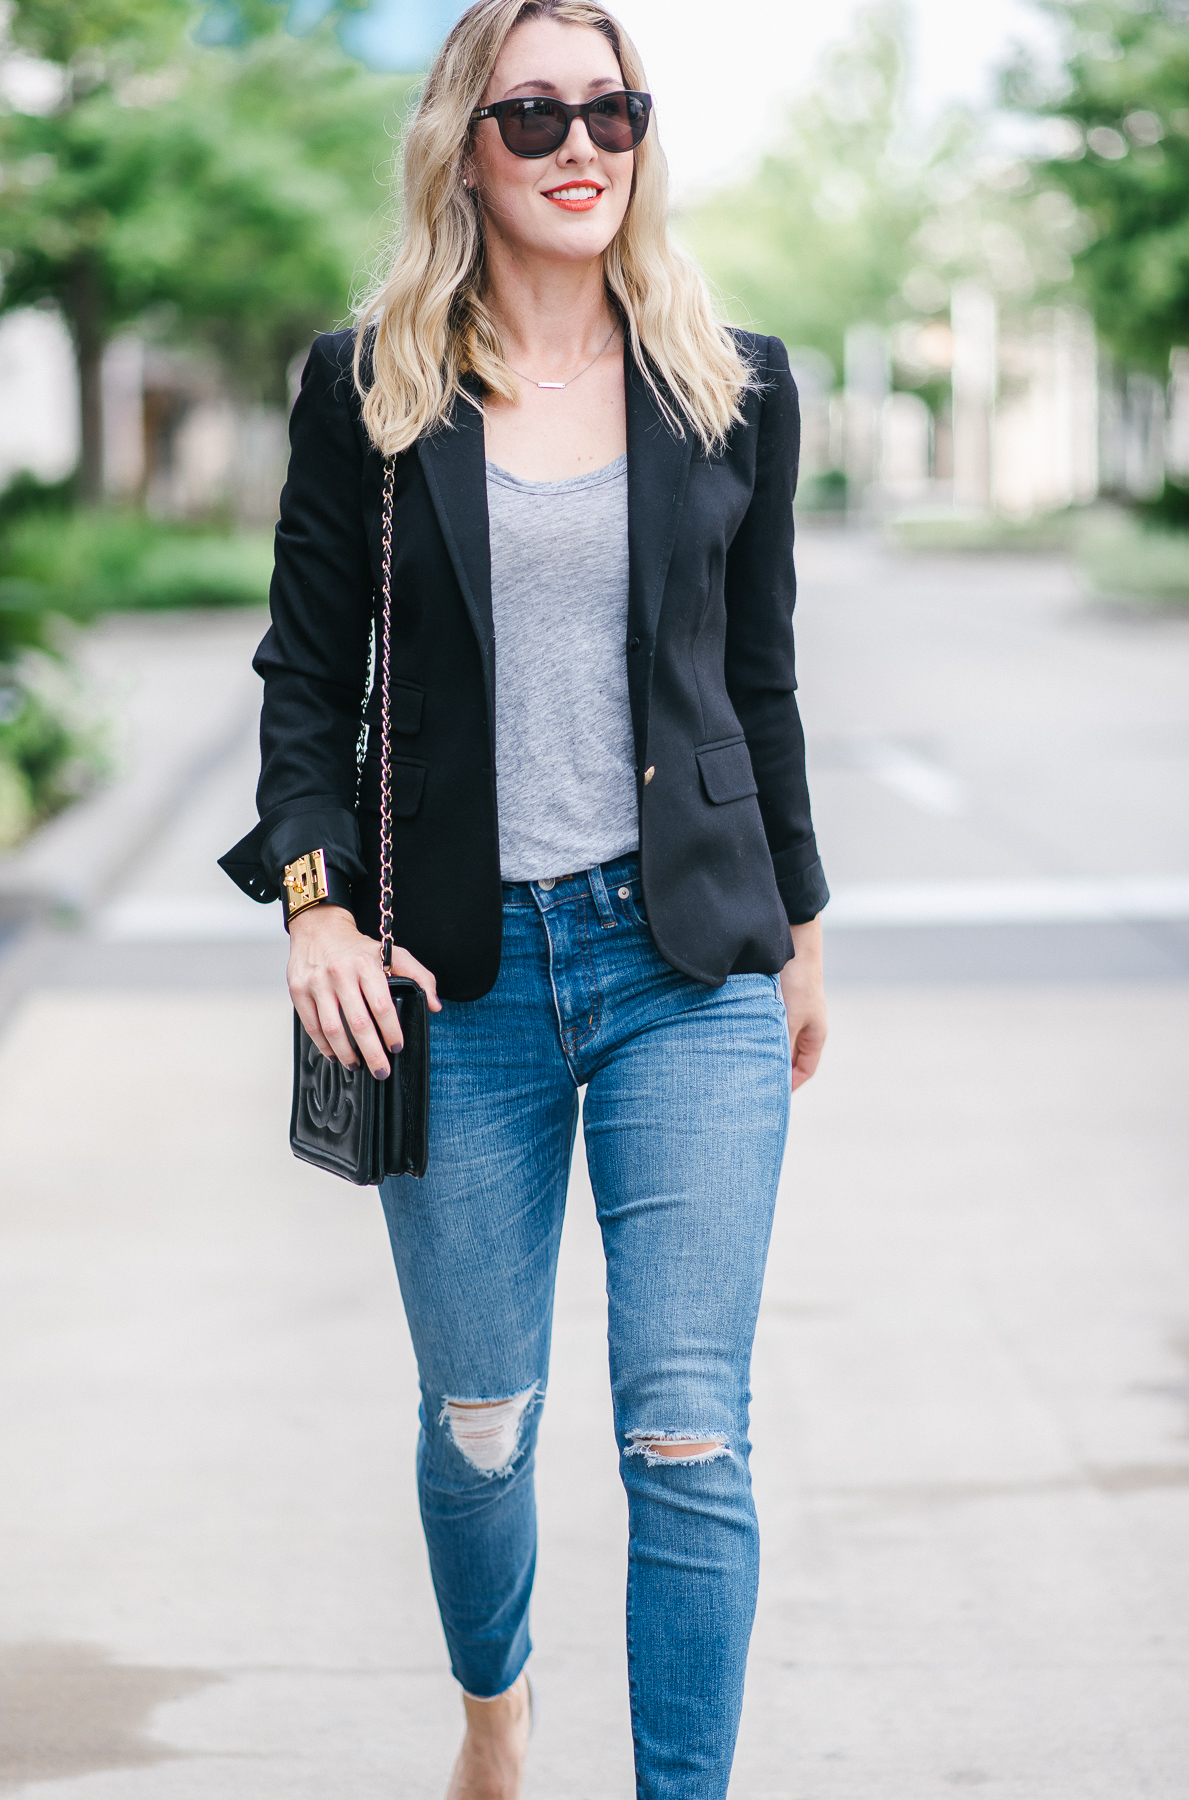 How to wear a blazer for fall